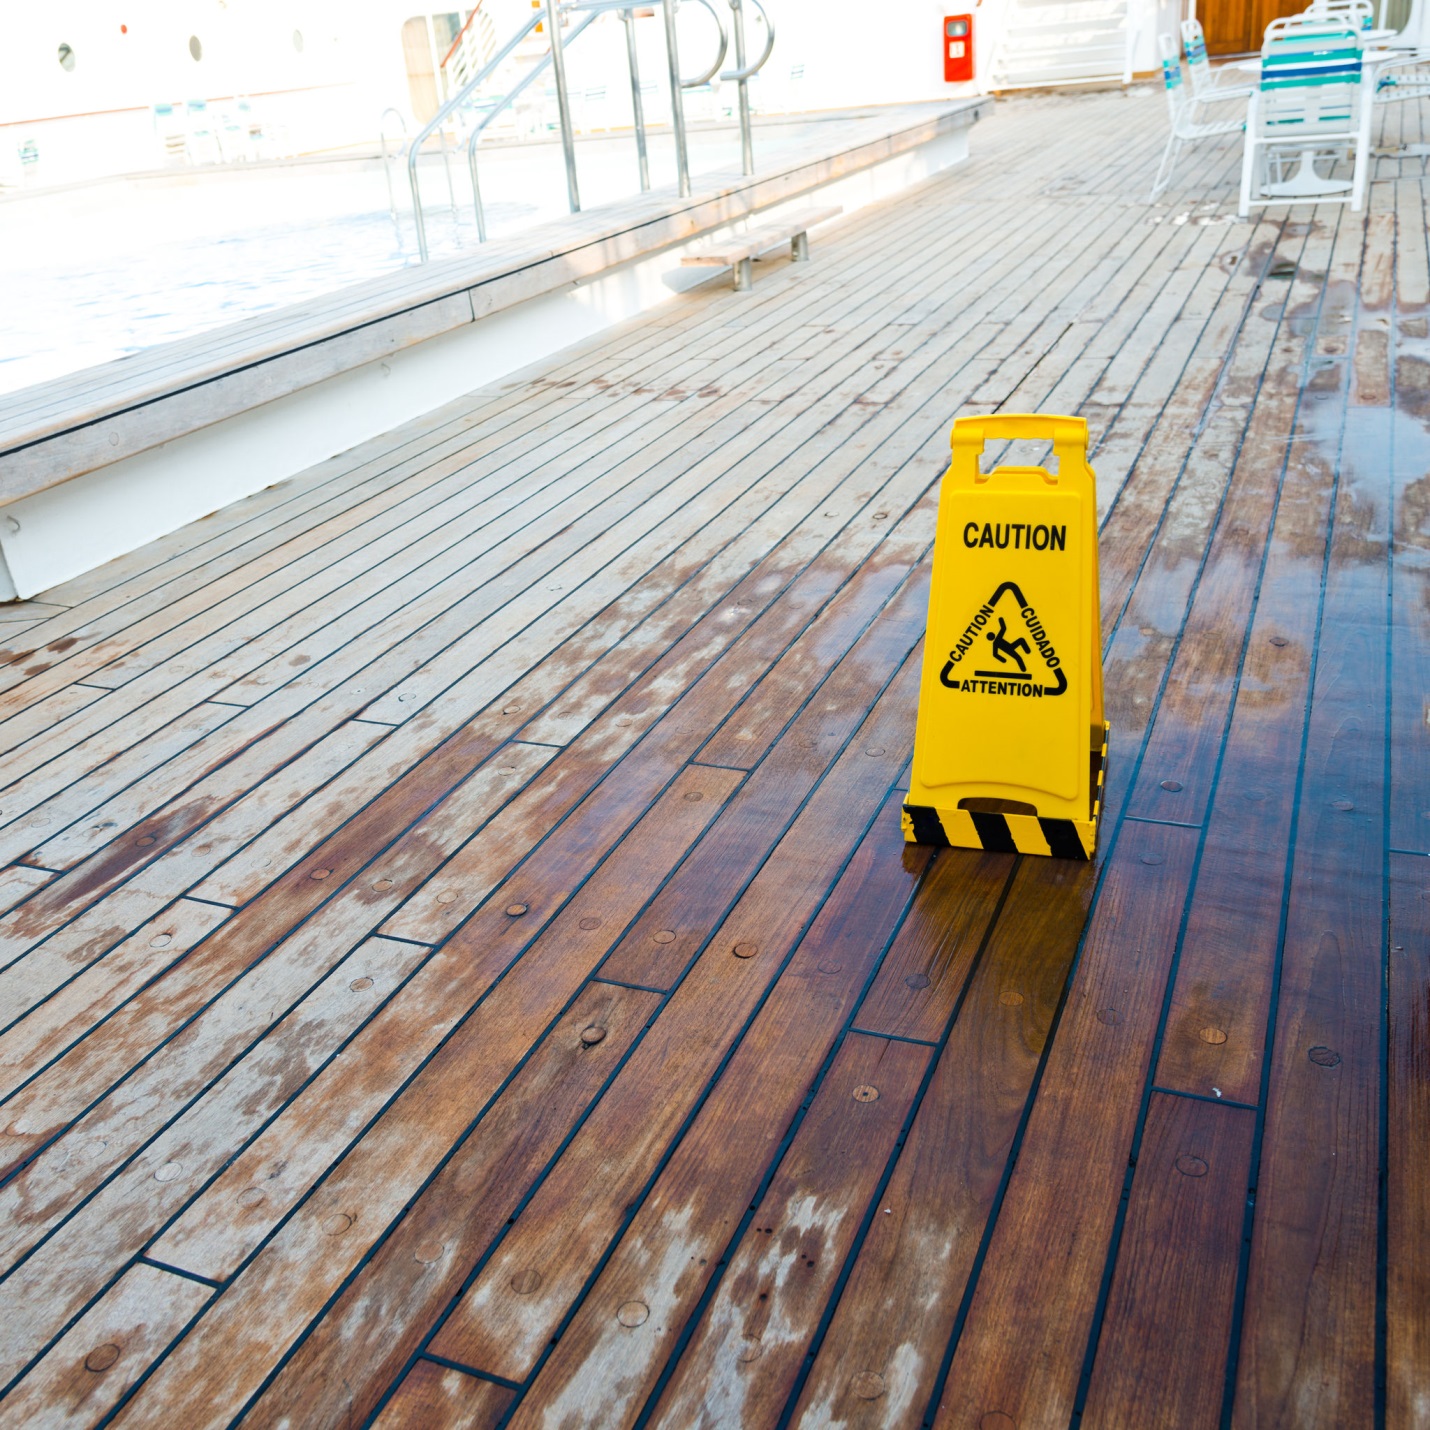 Fort Lauderdale Slip and Fall Lawyer